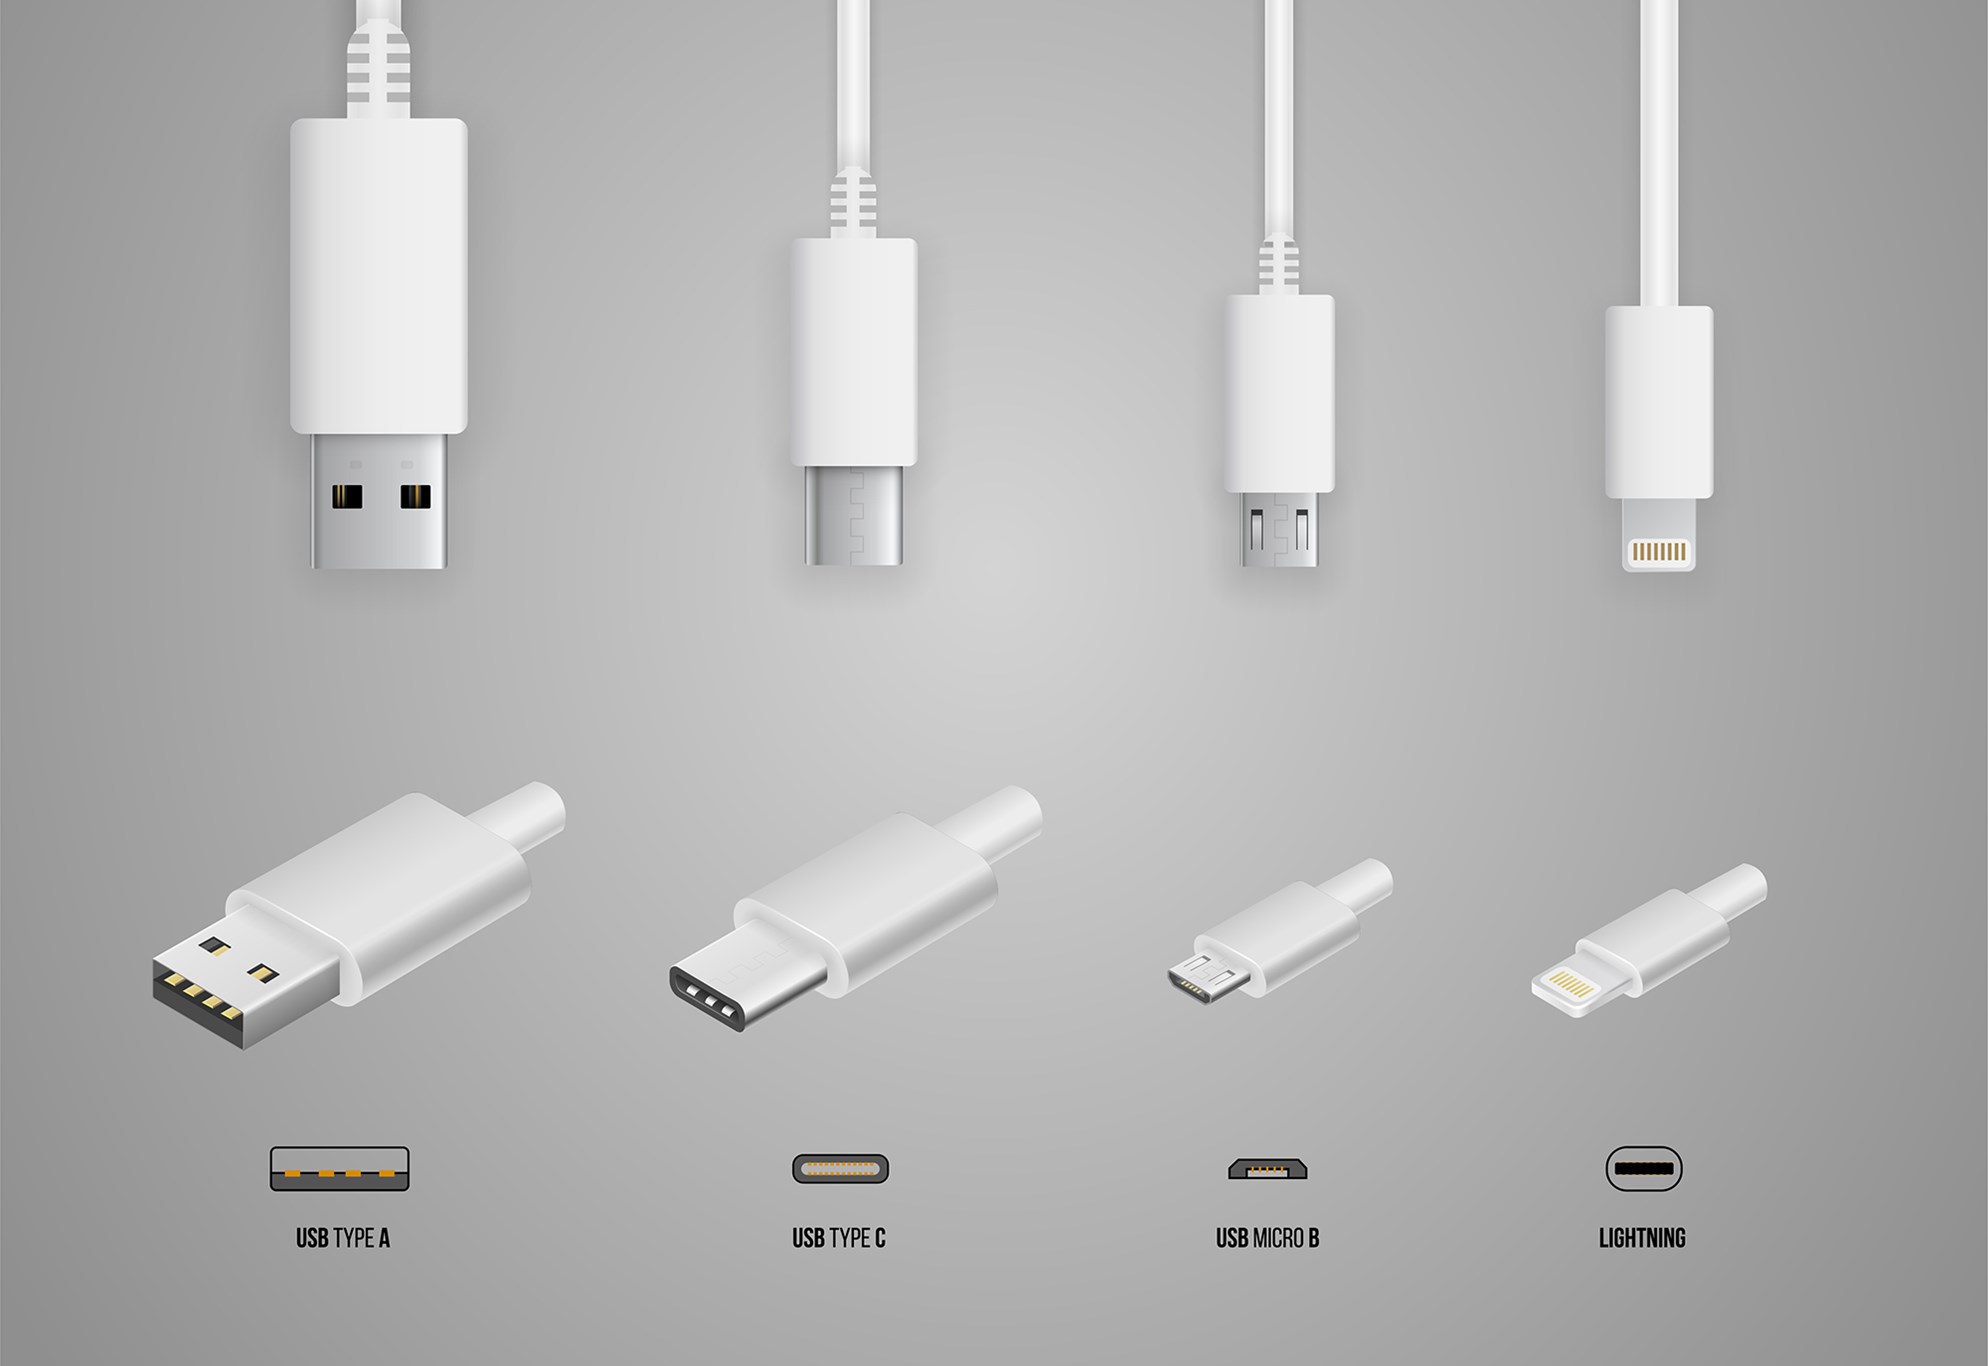 Apple's iPhone 15 USB-C Port Has Me Stoked. But There Are Downsides - CNET